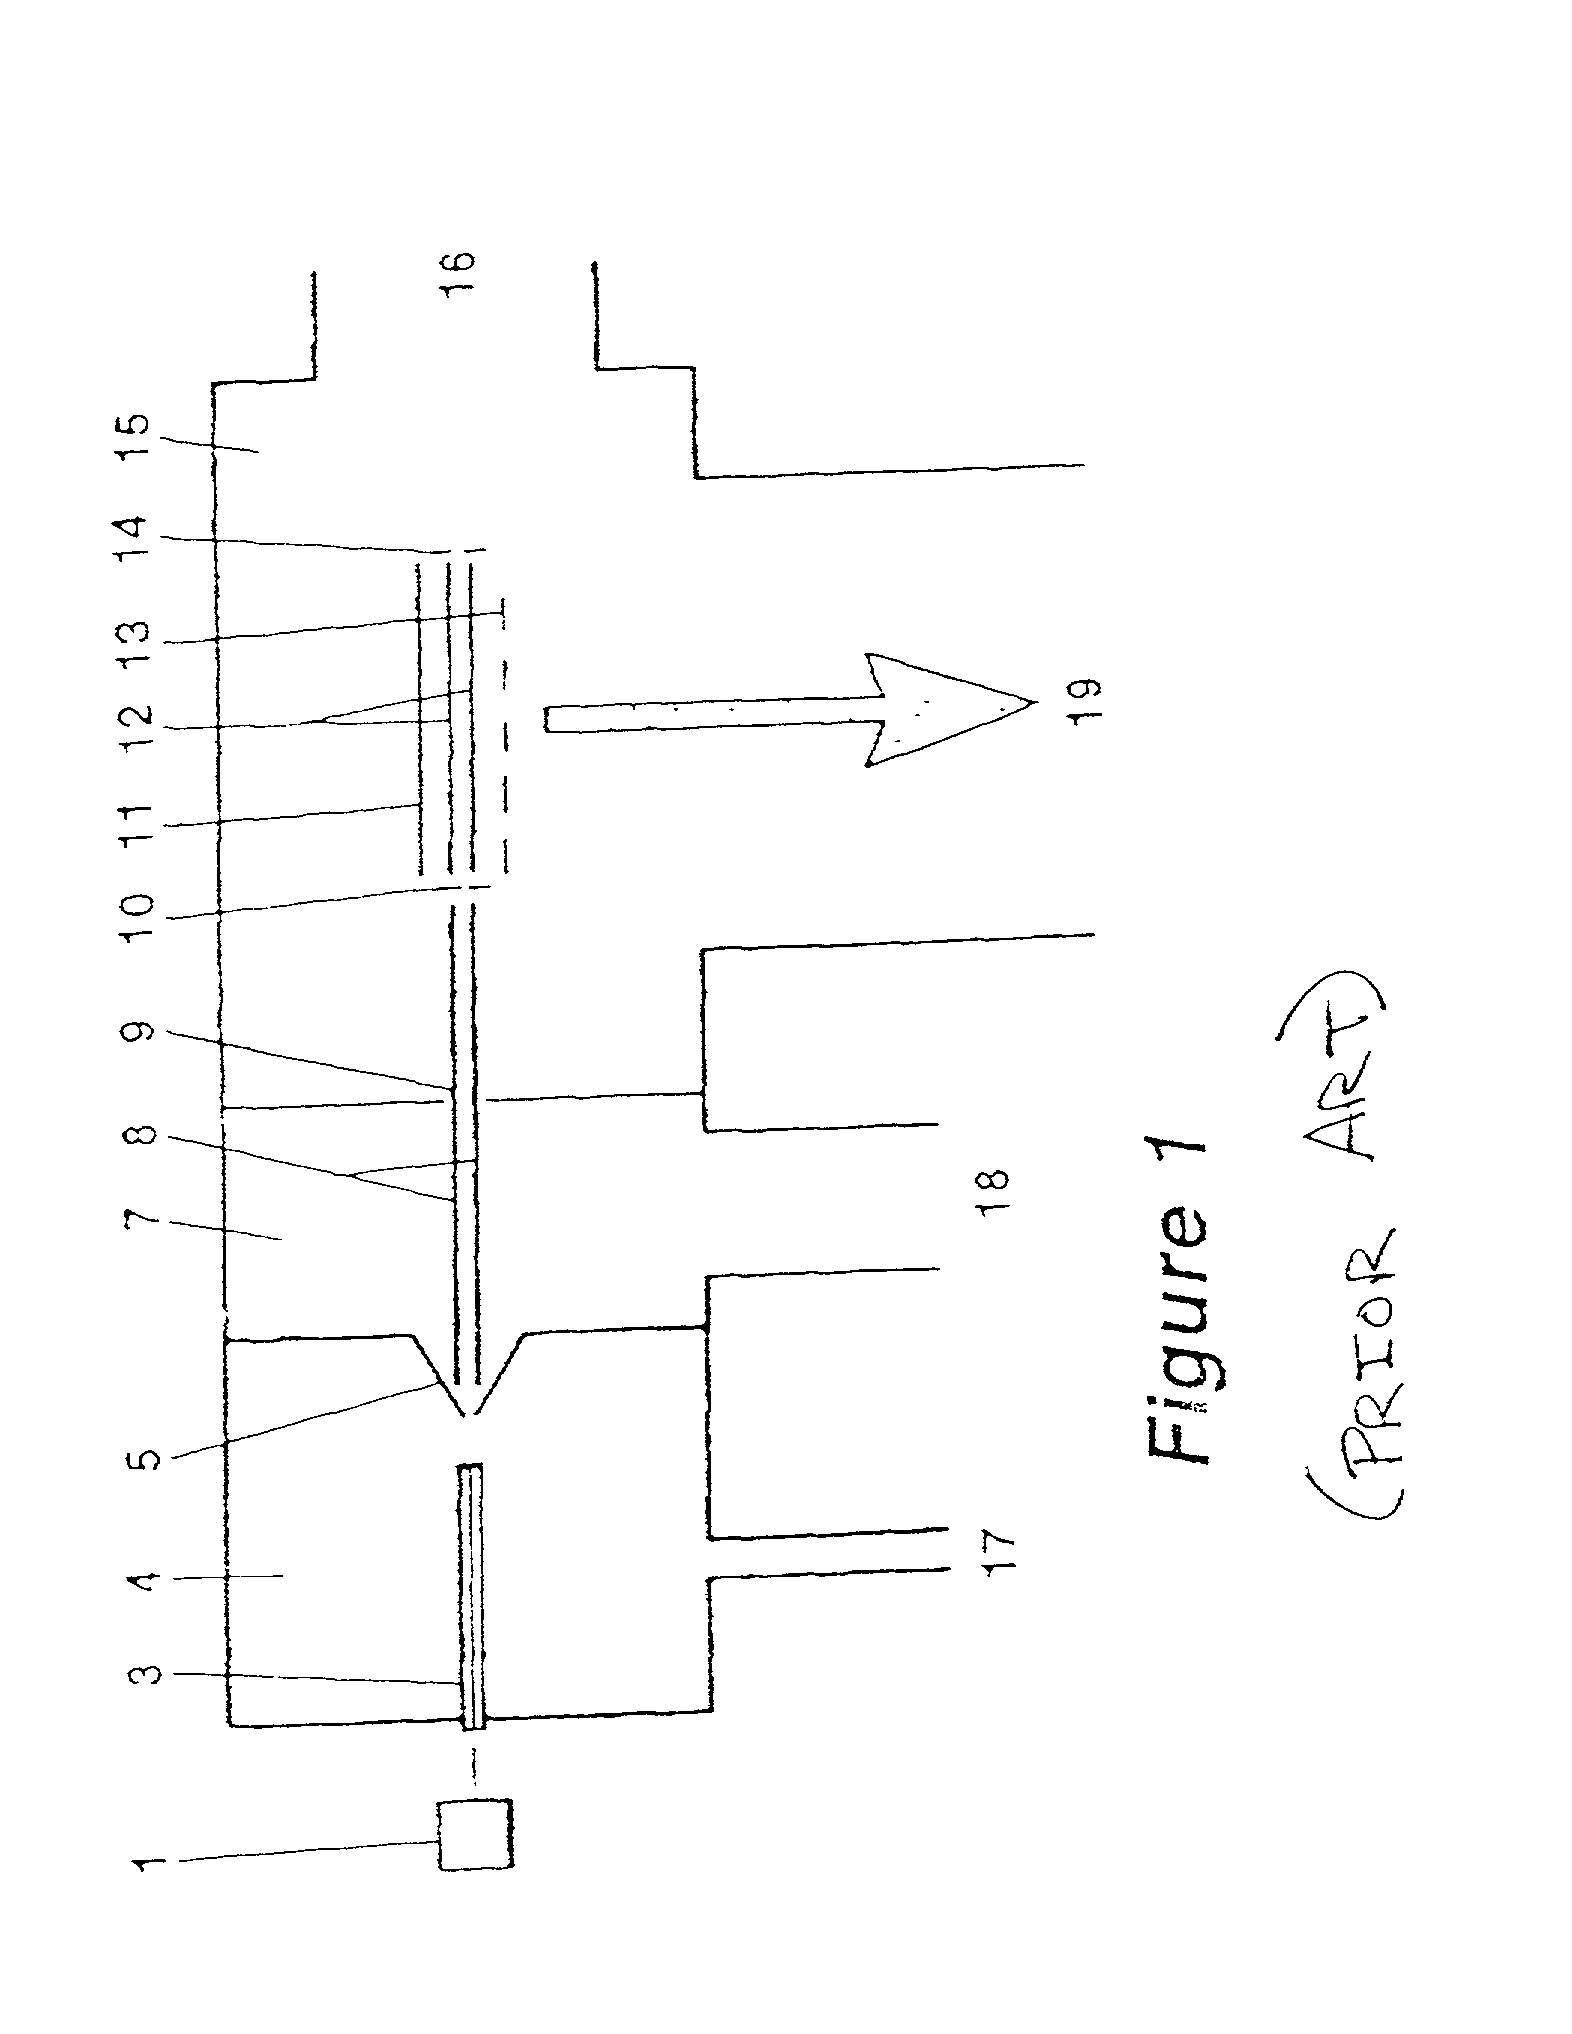 Apparatus and method for analyzing samples in a dual ion trap mass spectrometer